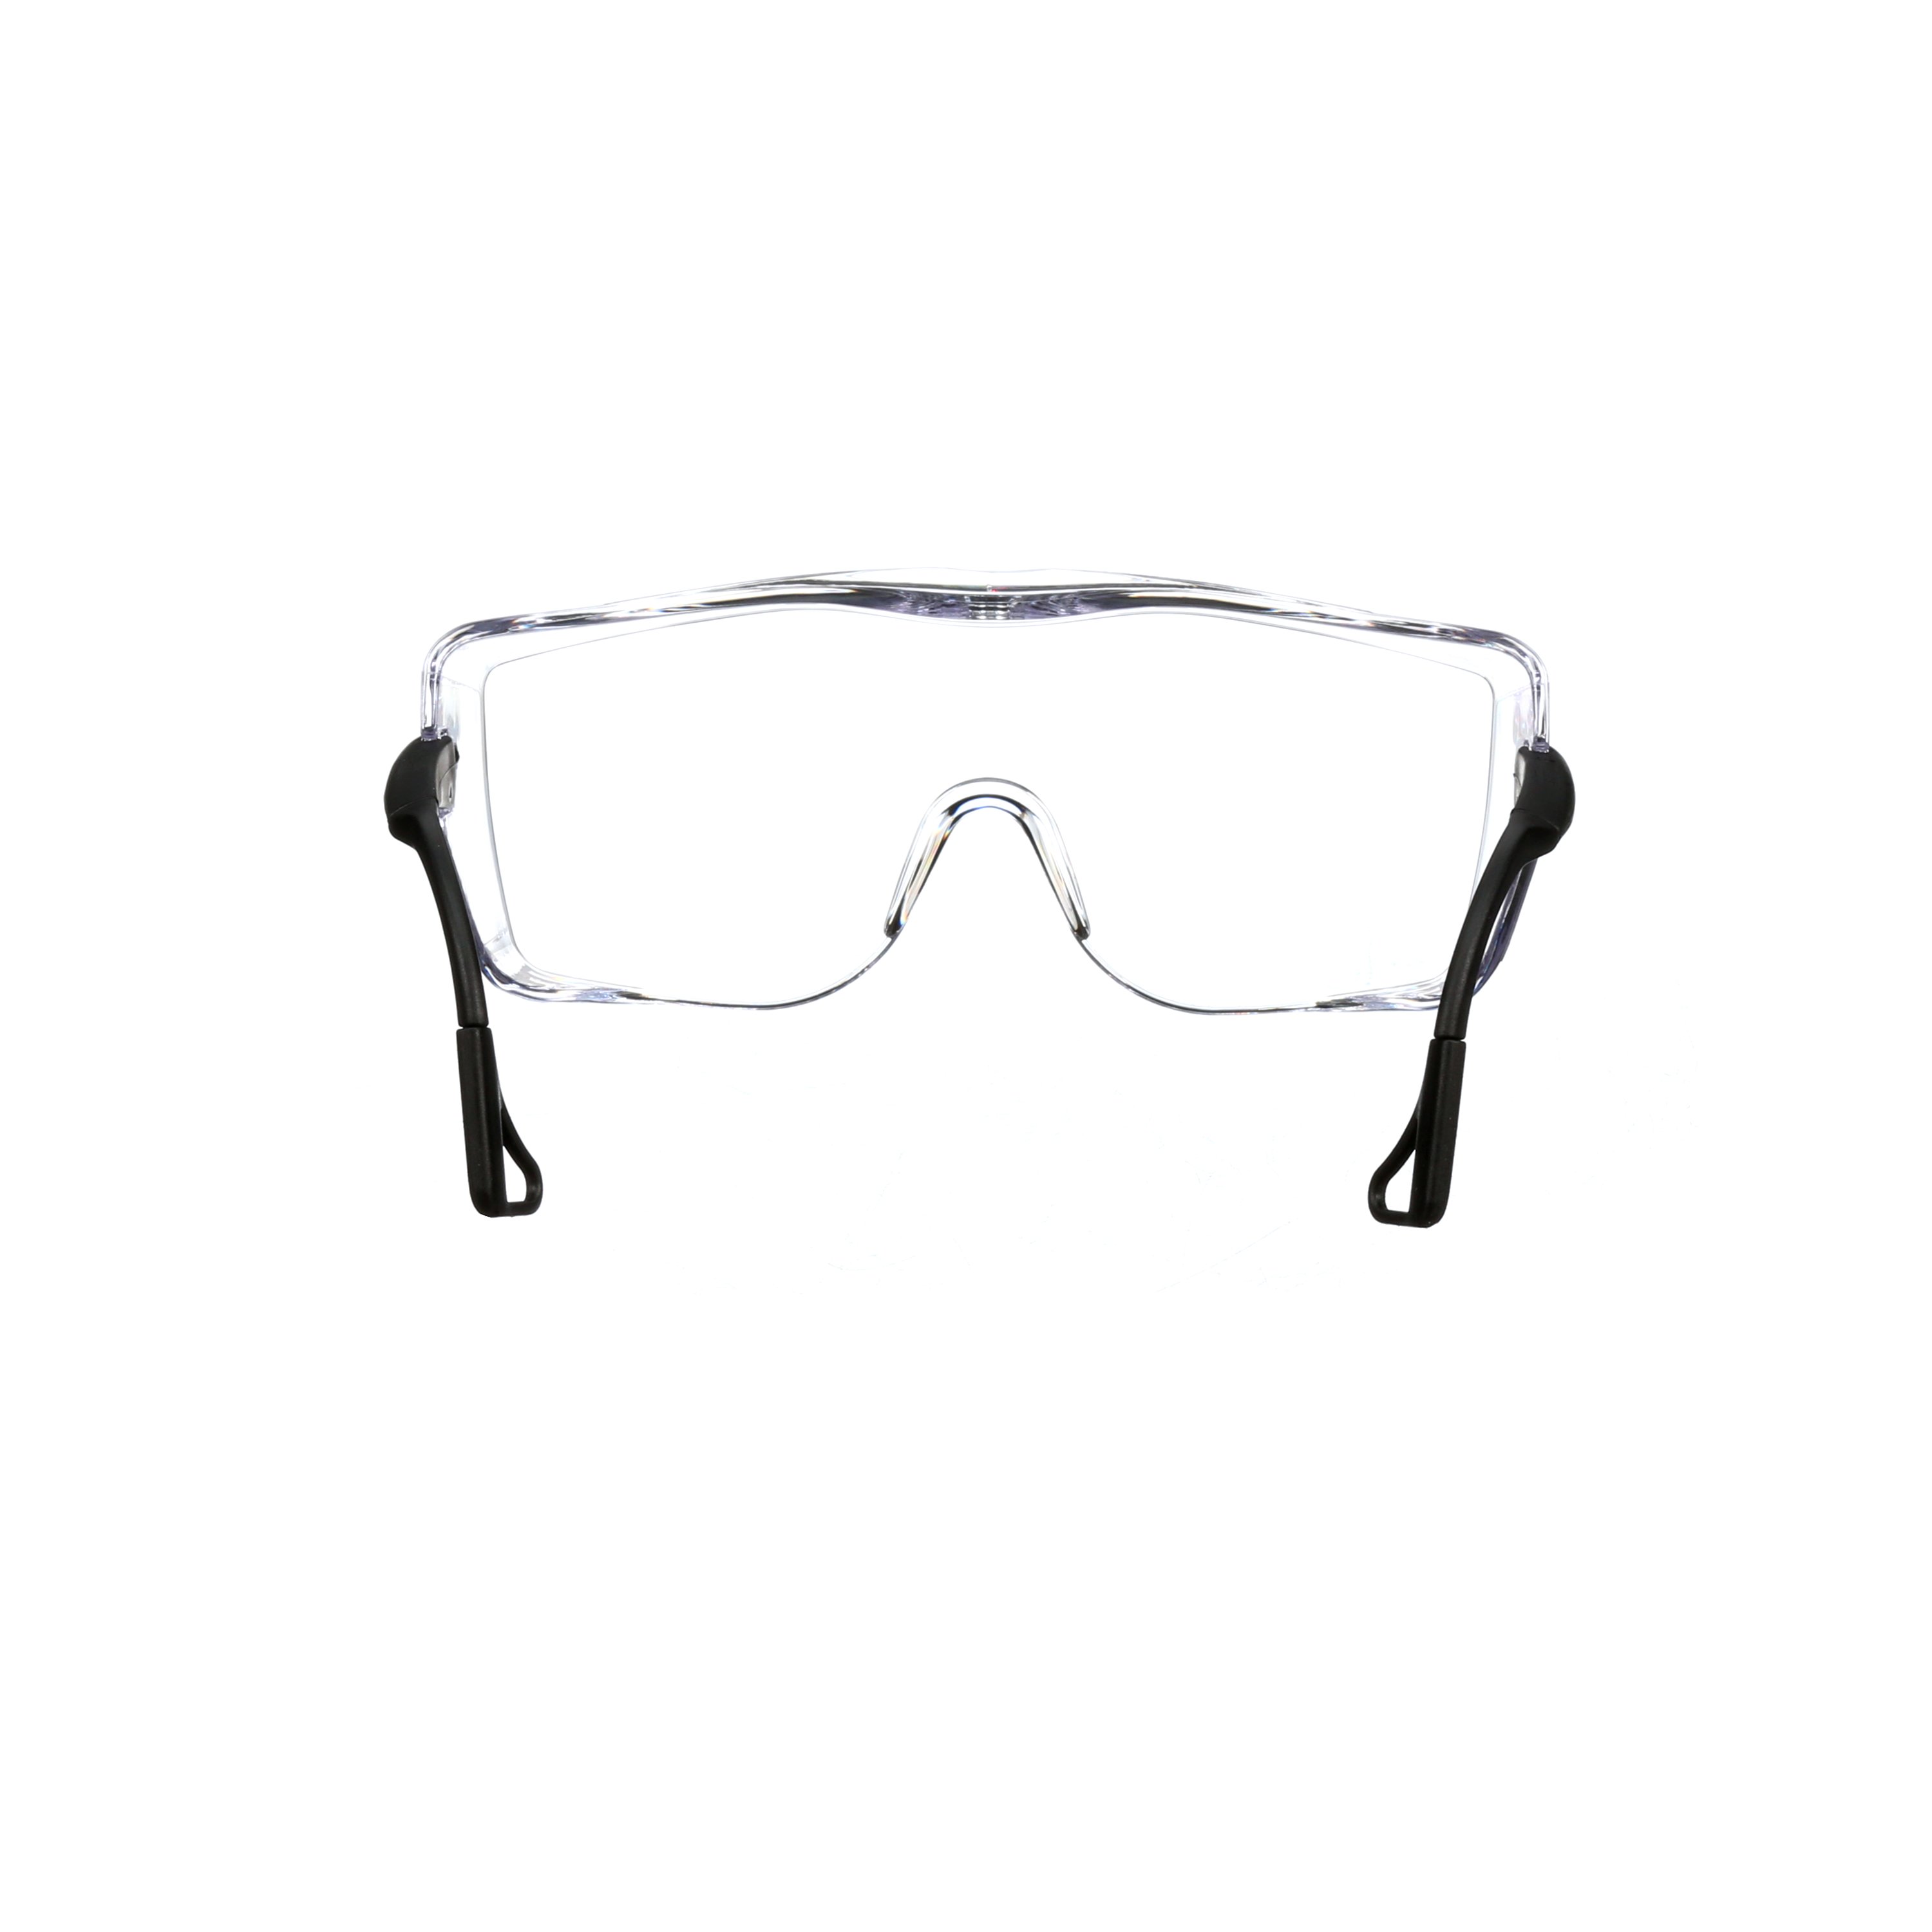 Personal Protective Equipment Eye And Face Protection Safety Glasses 3m™ Ox Safety Eyewear